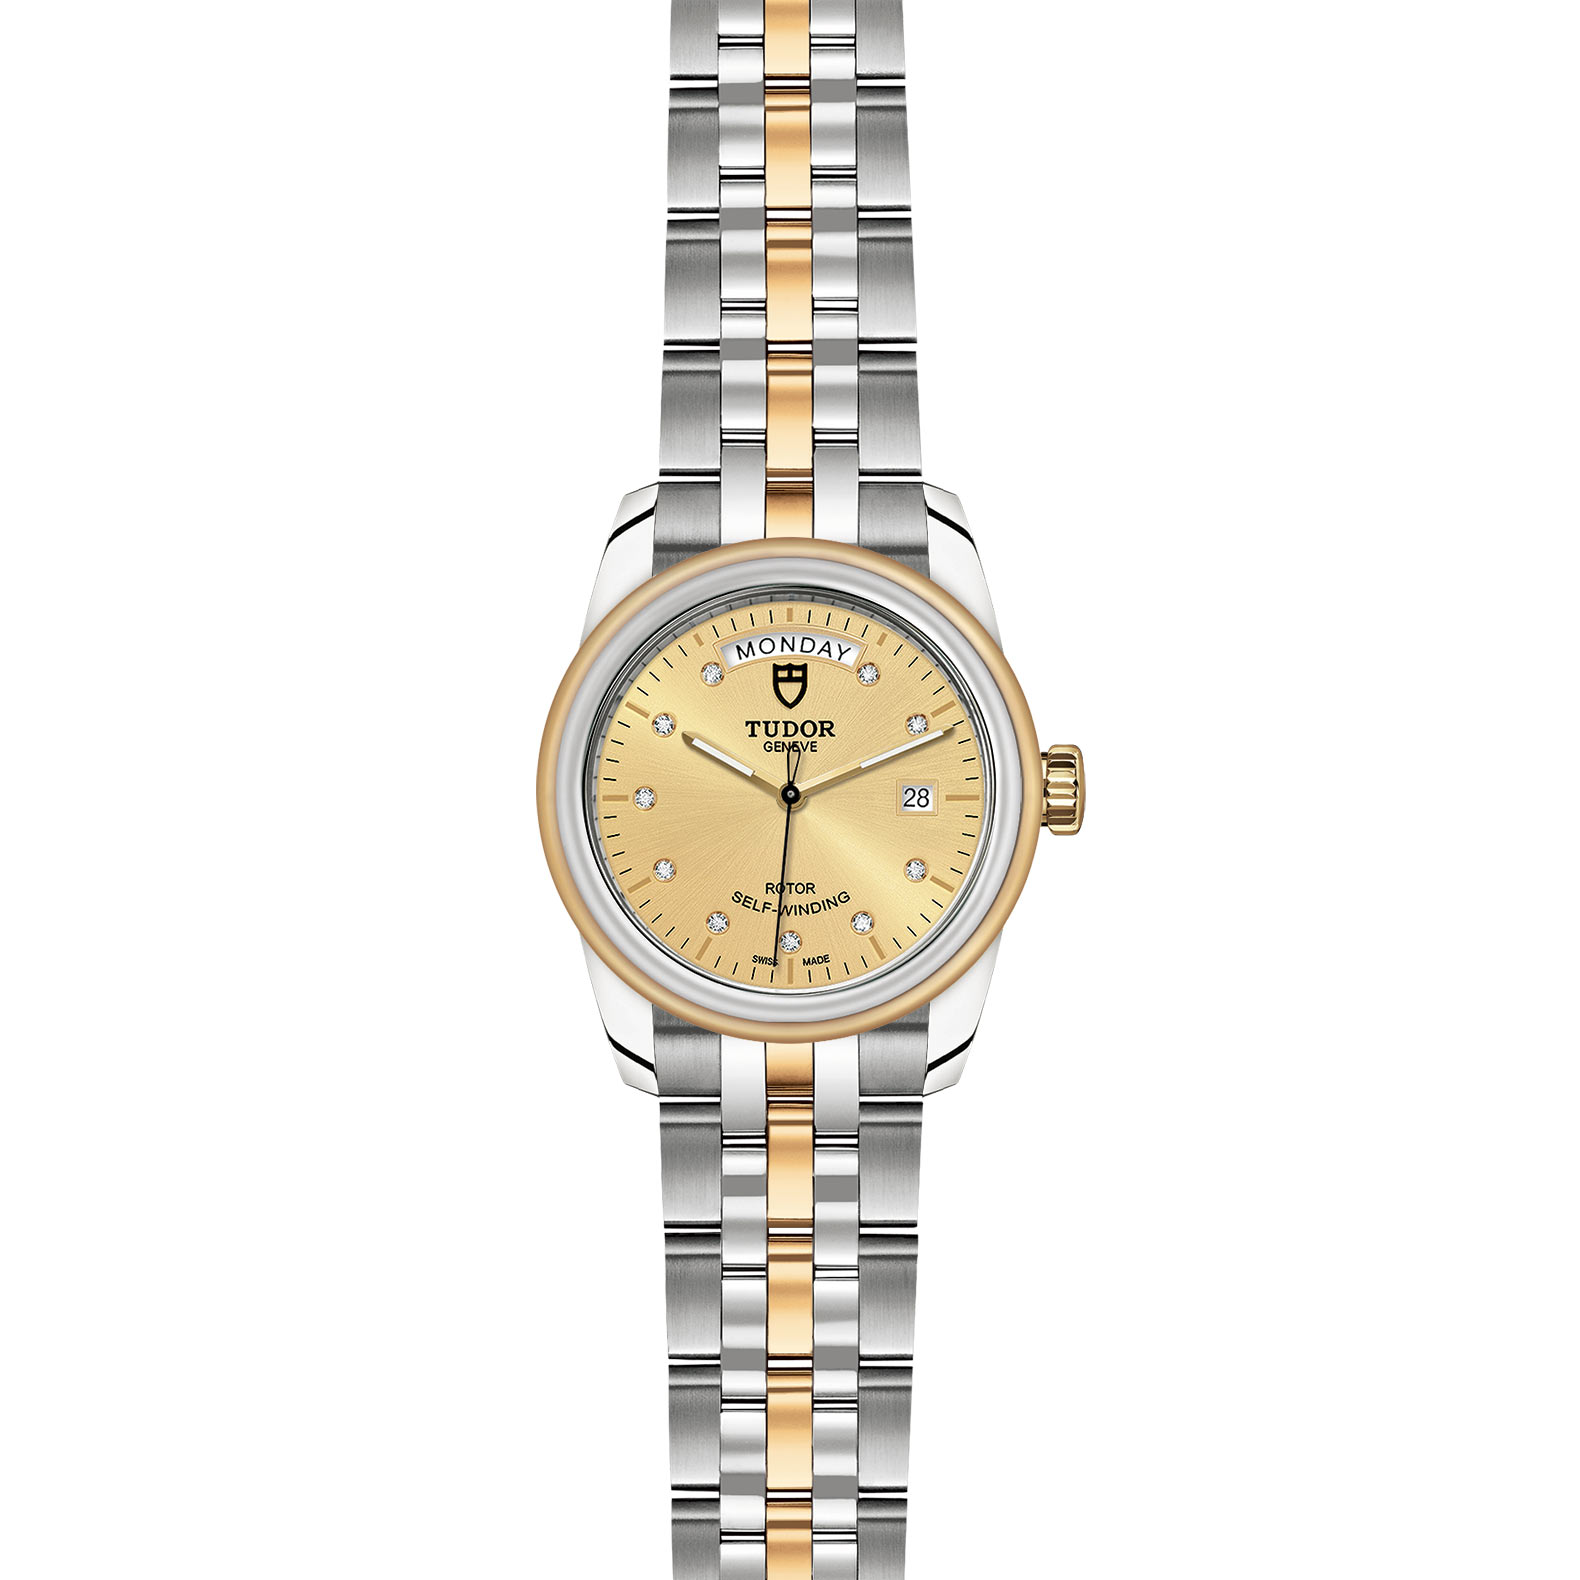 TUDOR Glamour Date Day M56003 0006 Frontfacing